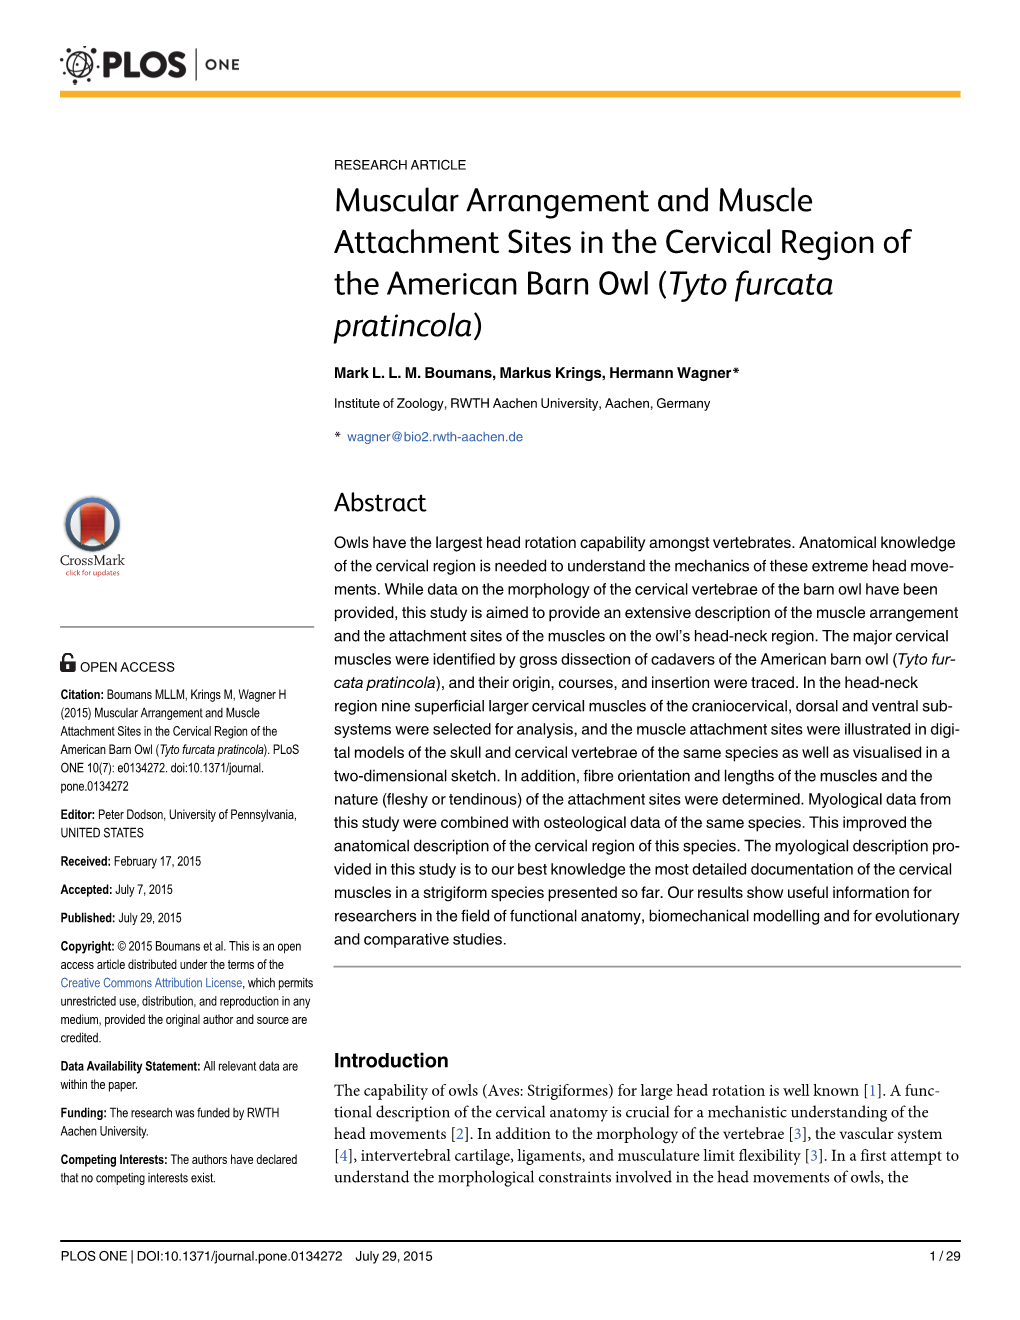 Muscular Arrangement and Muscle Attachment Sites in the Cervical Region of the American Barn Owl (Tyto Furcata Pratincola)